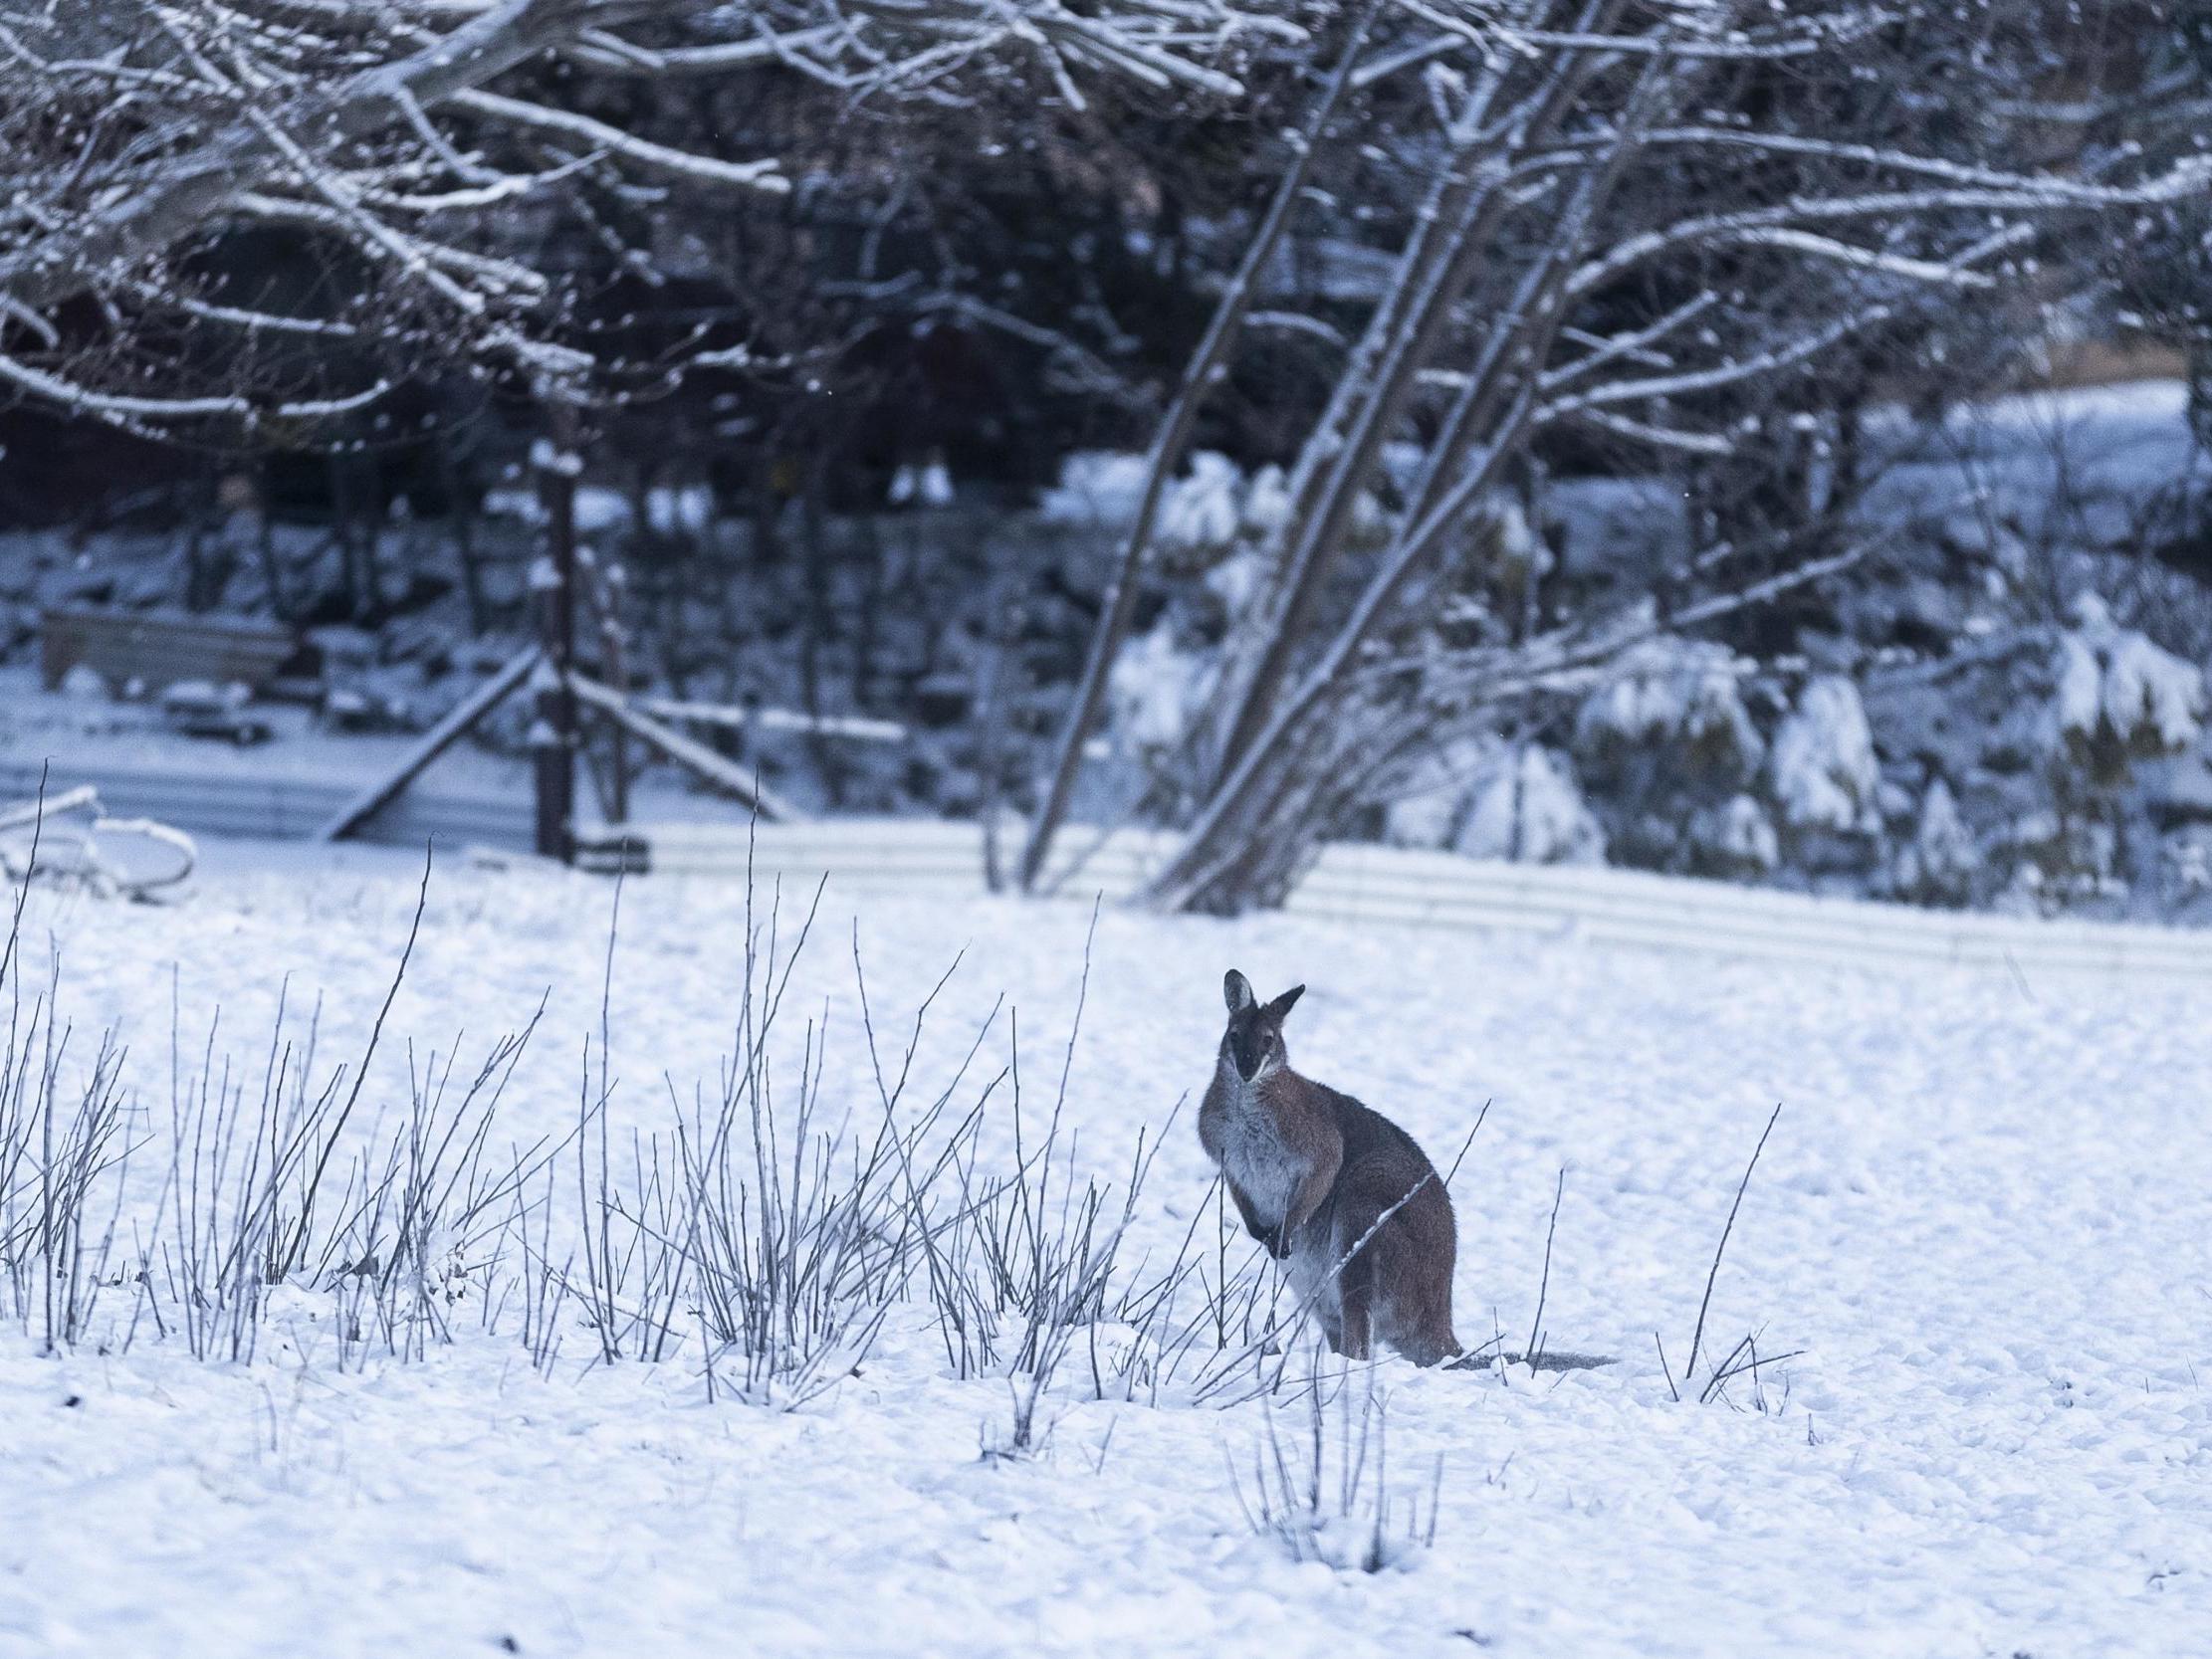 Australia coated in rare snow as ‘Antarctic blob’ settles over nation